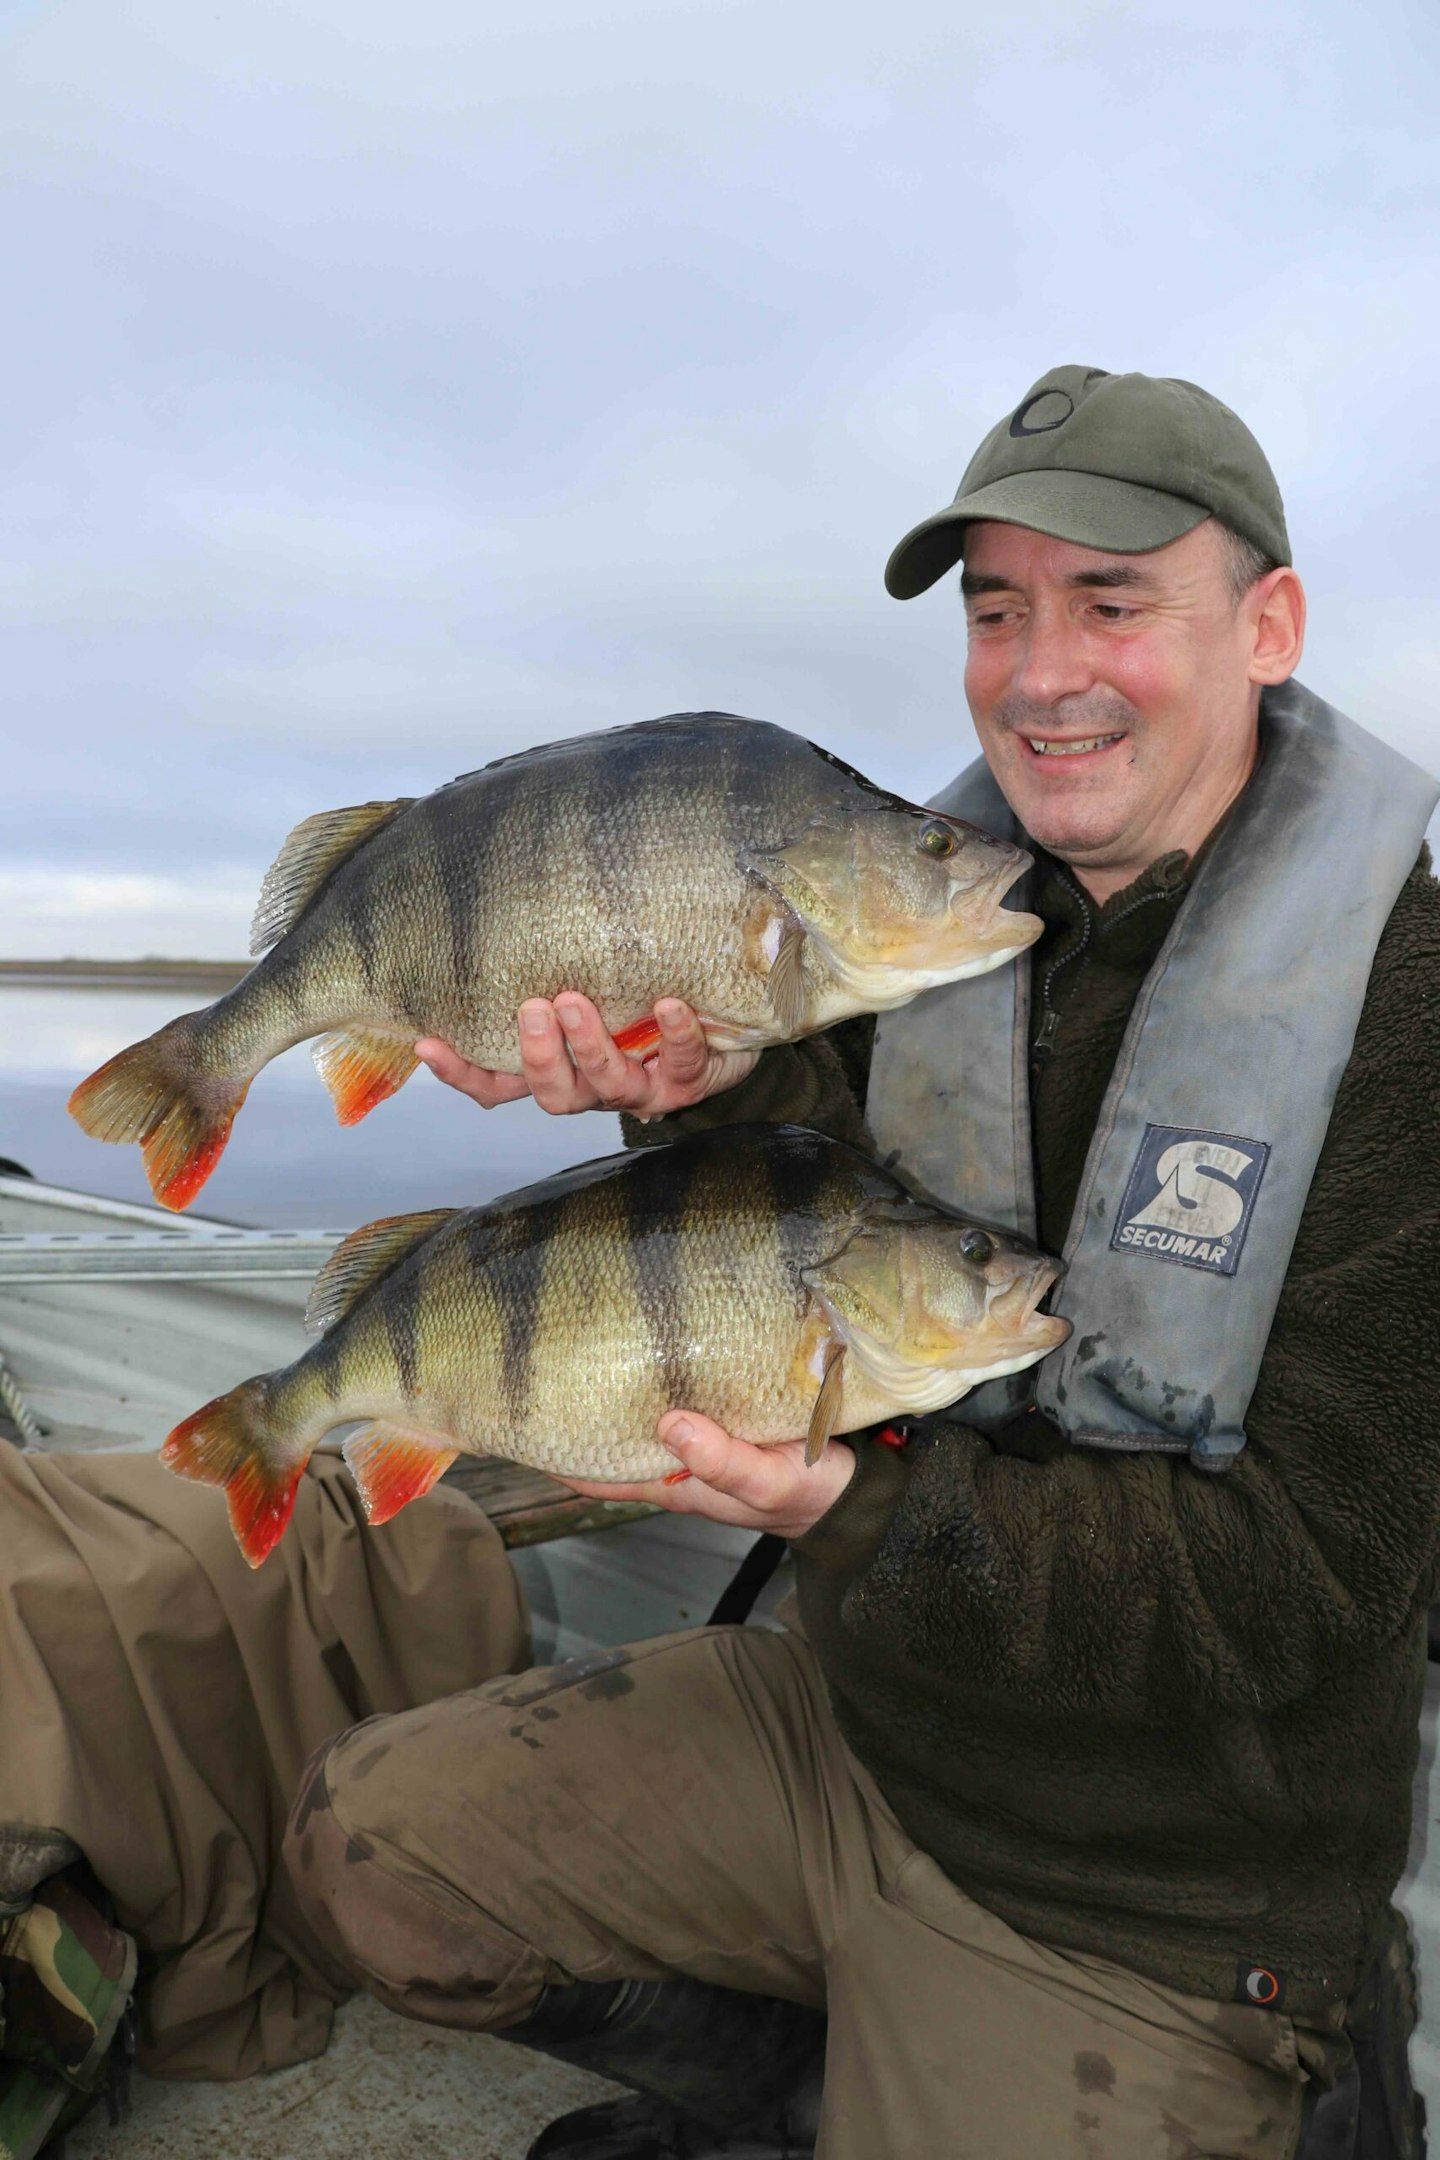 Alan Stagg with his superb brace of perch.